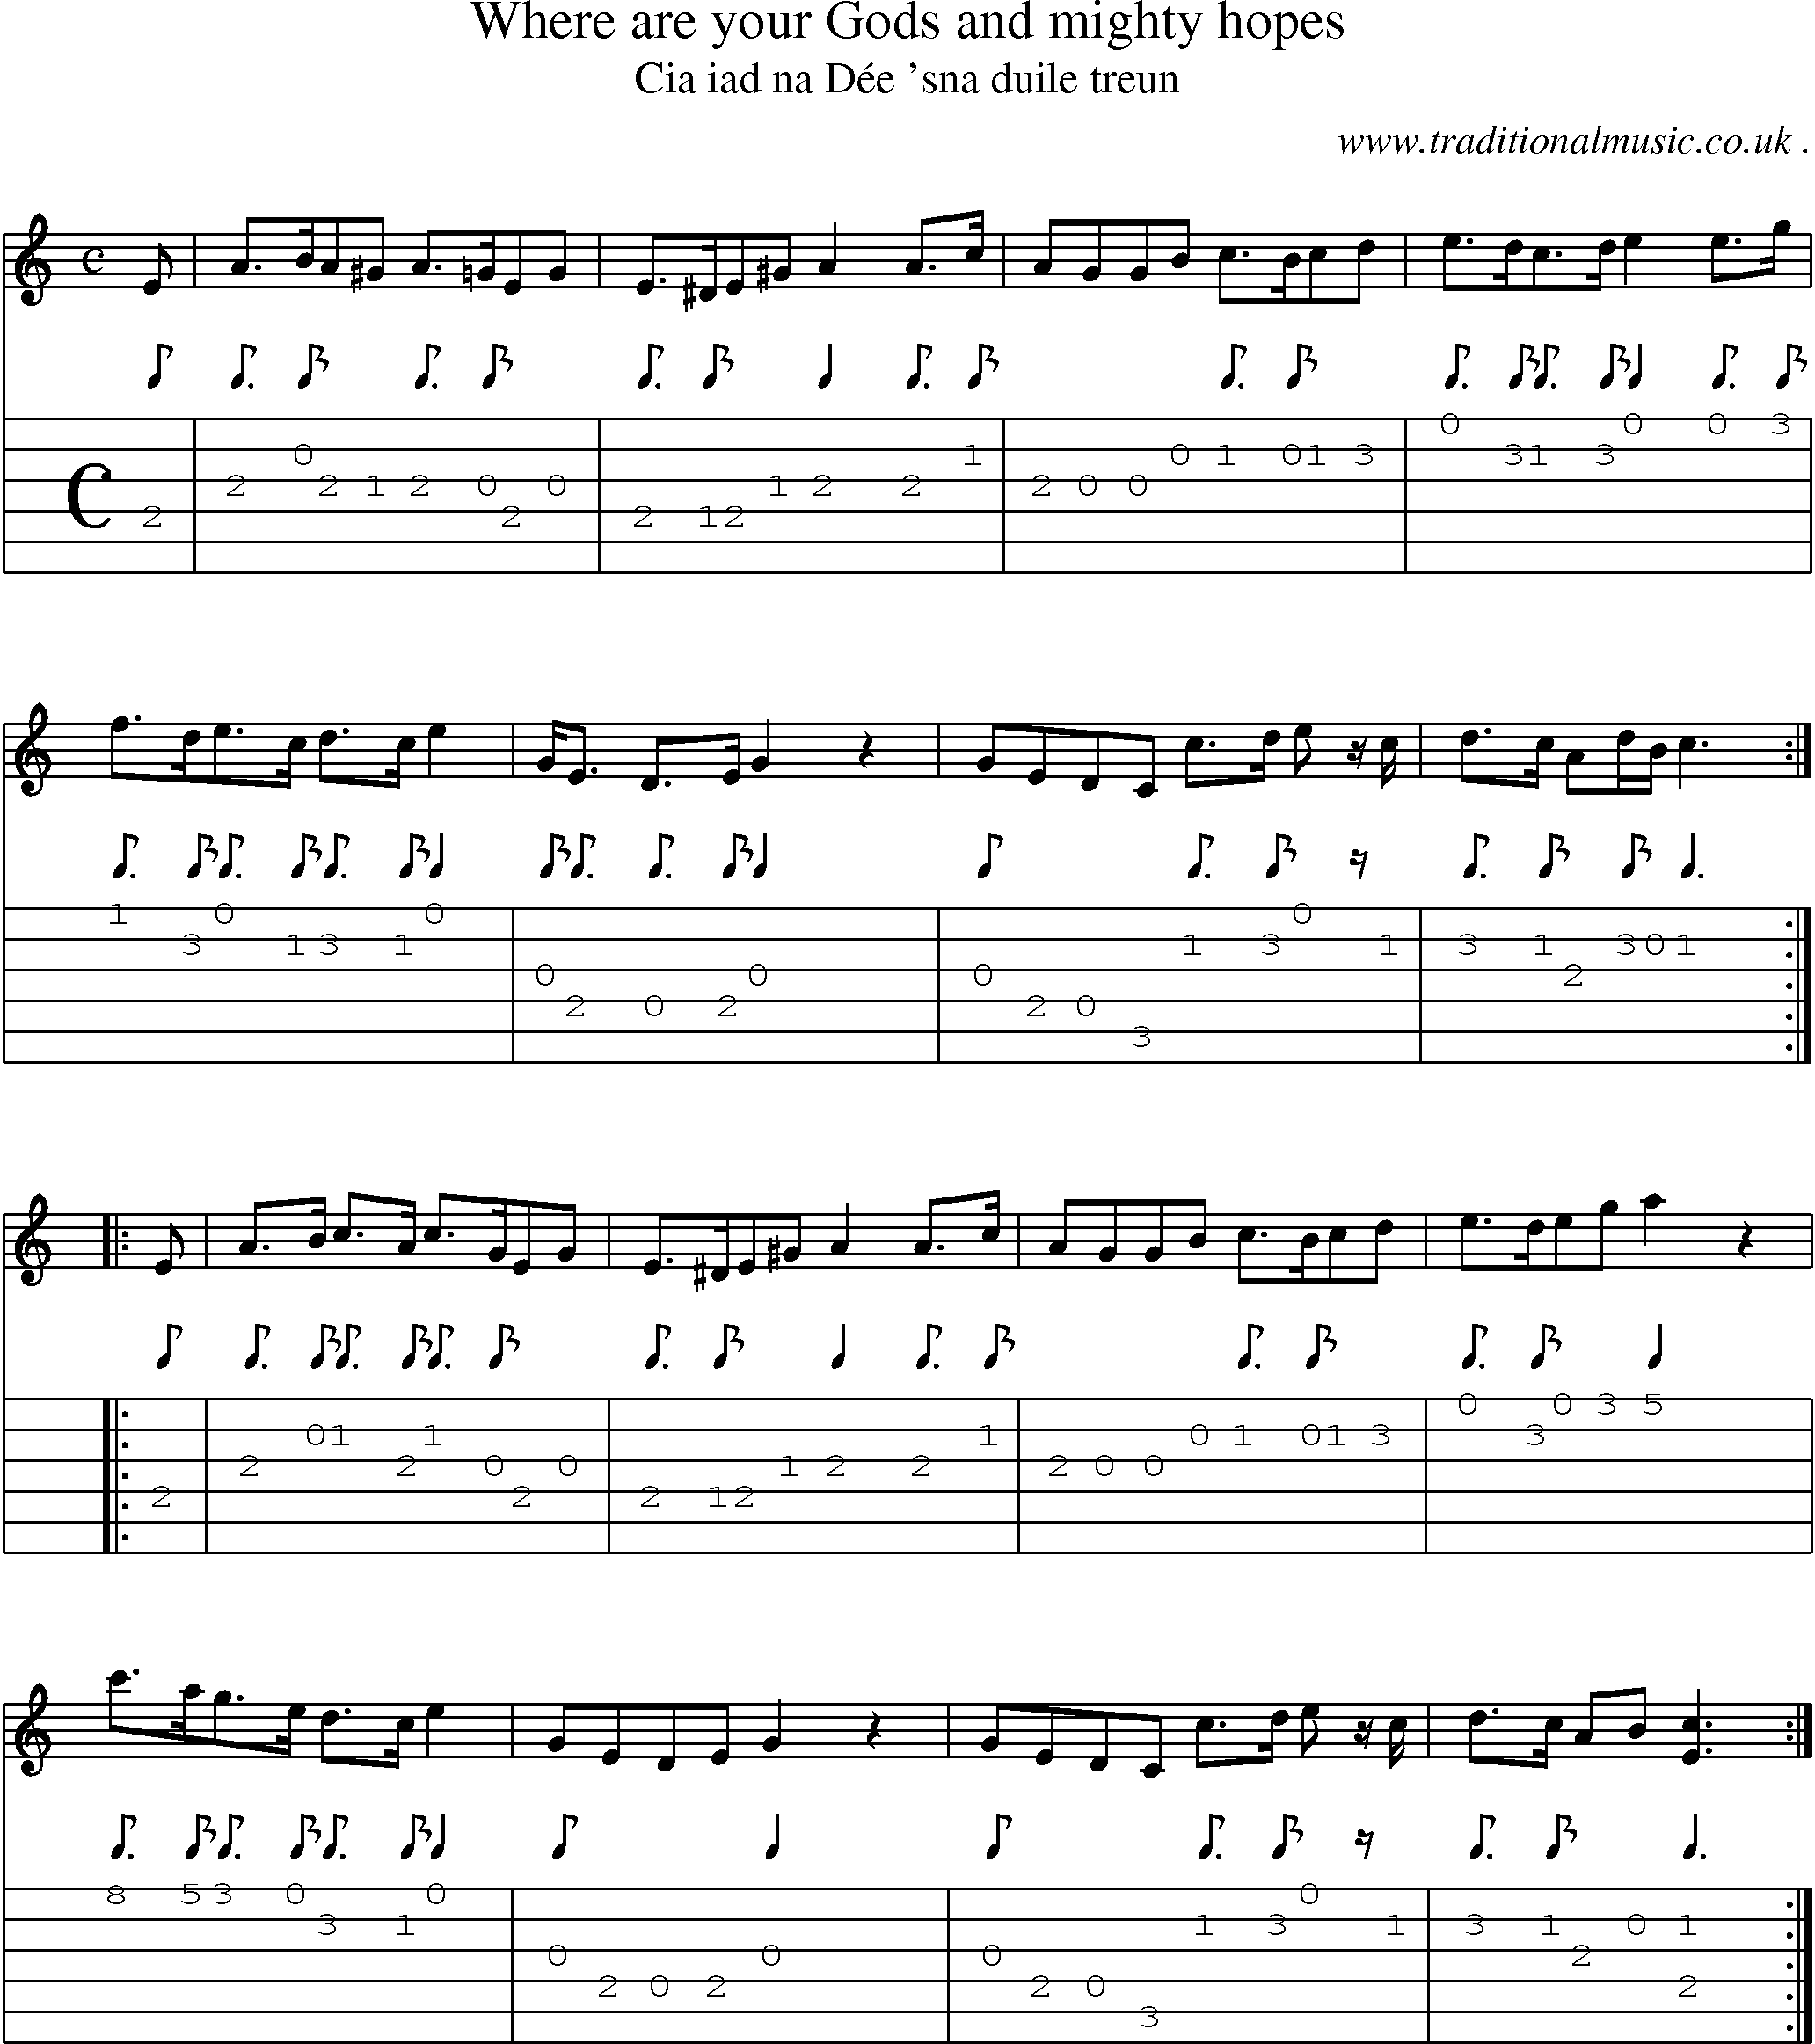 Sheet-music  score, Chords and Guitar Tabs for Where Are Your Gods And Mighty Hopes